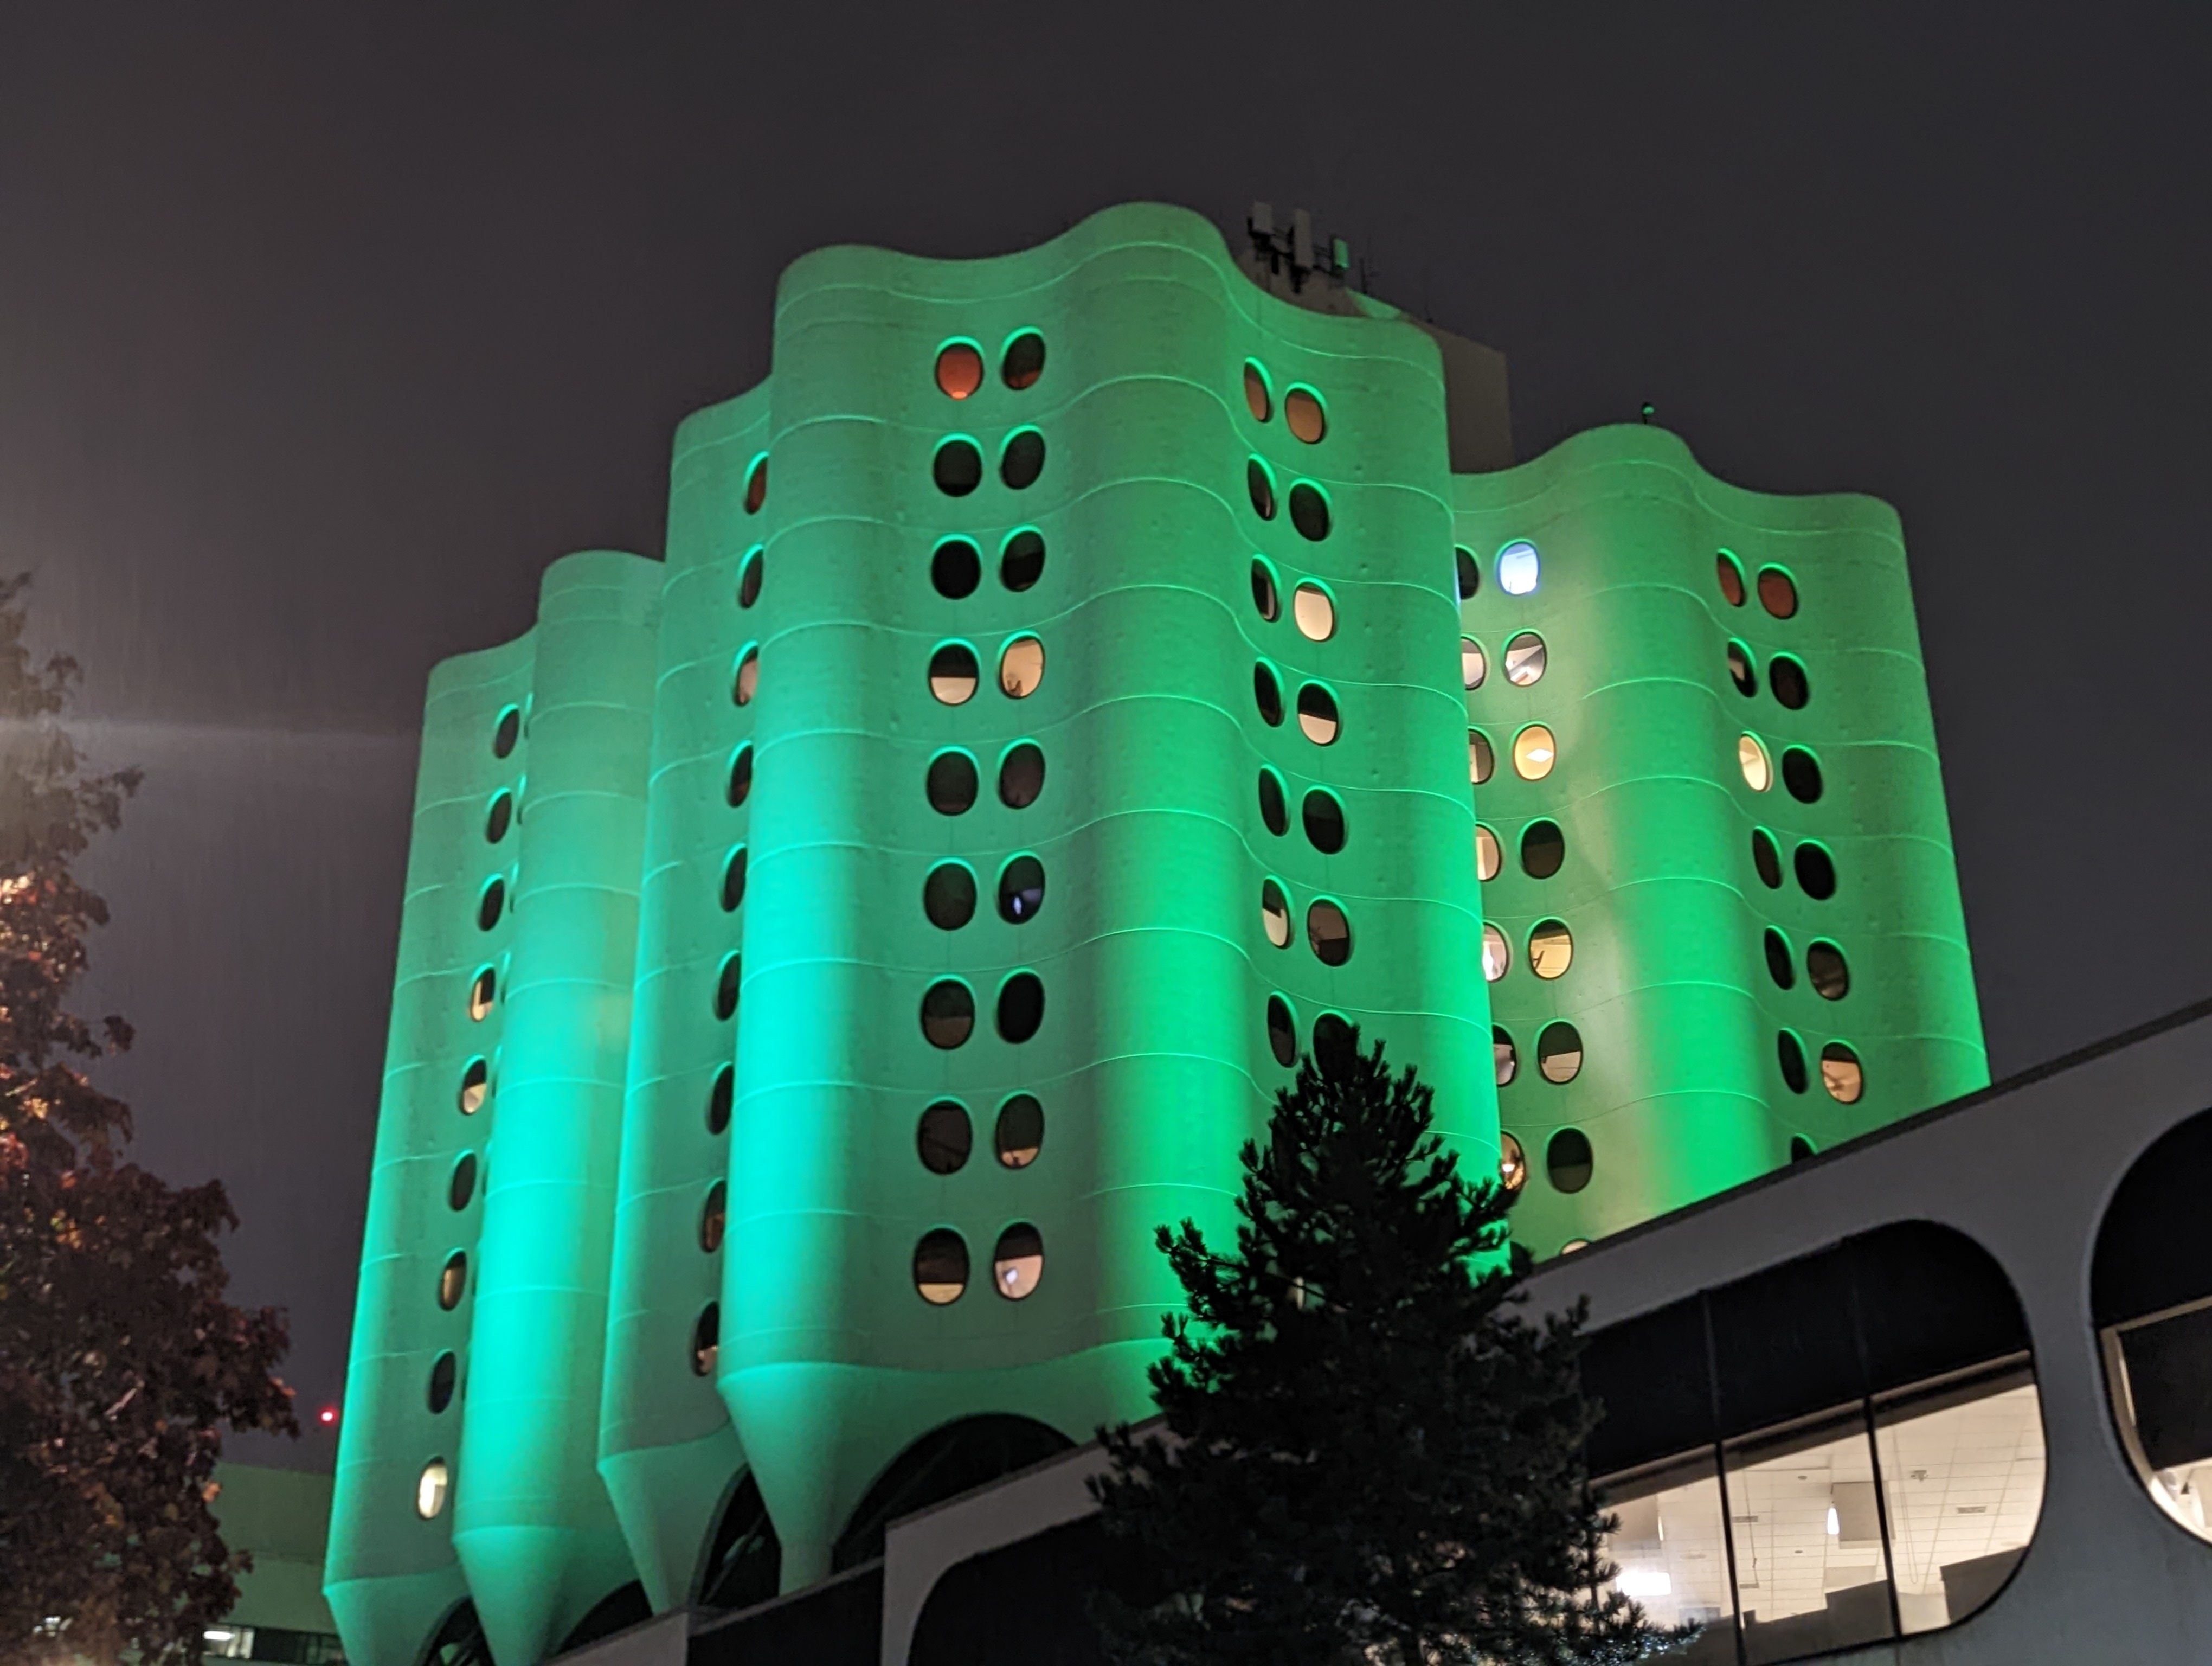 Curving tower blocks with green lighting against a night sky. 